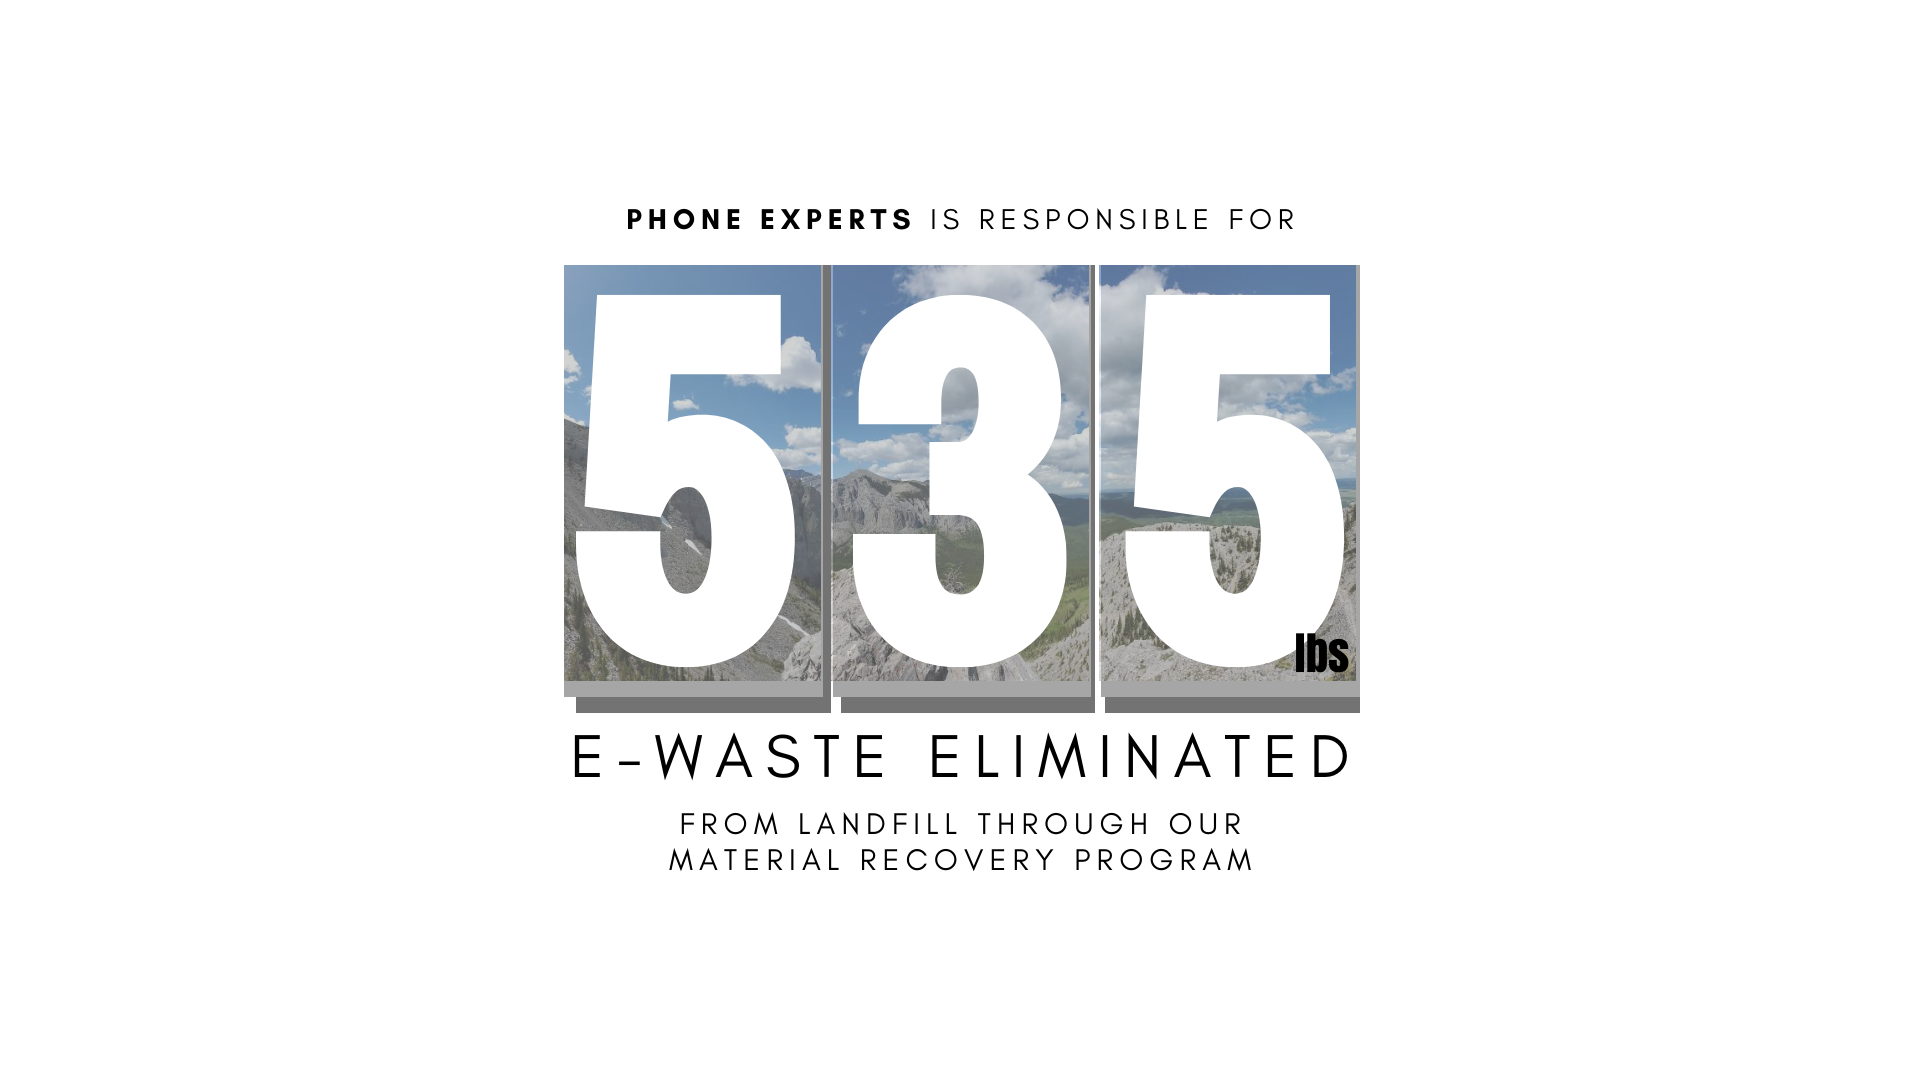 Phone Experts are responsible for eliminating more than</p>
<p>320</p>
<p>lbs<br />
of the total waste so far through the phone case recovery program